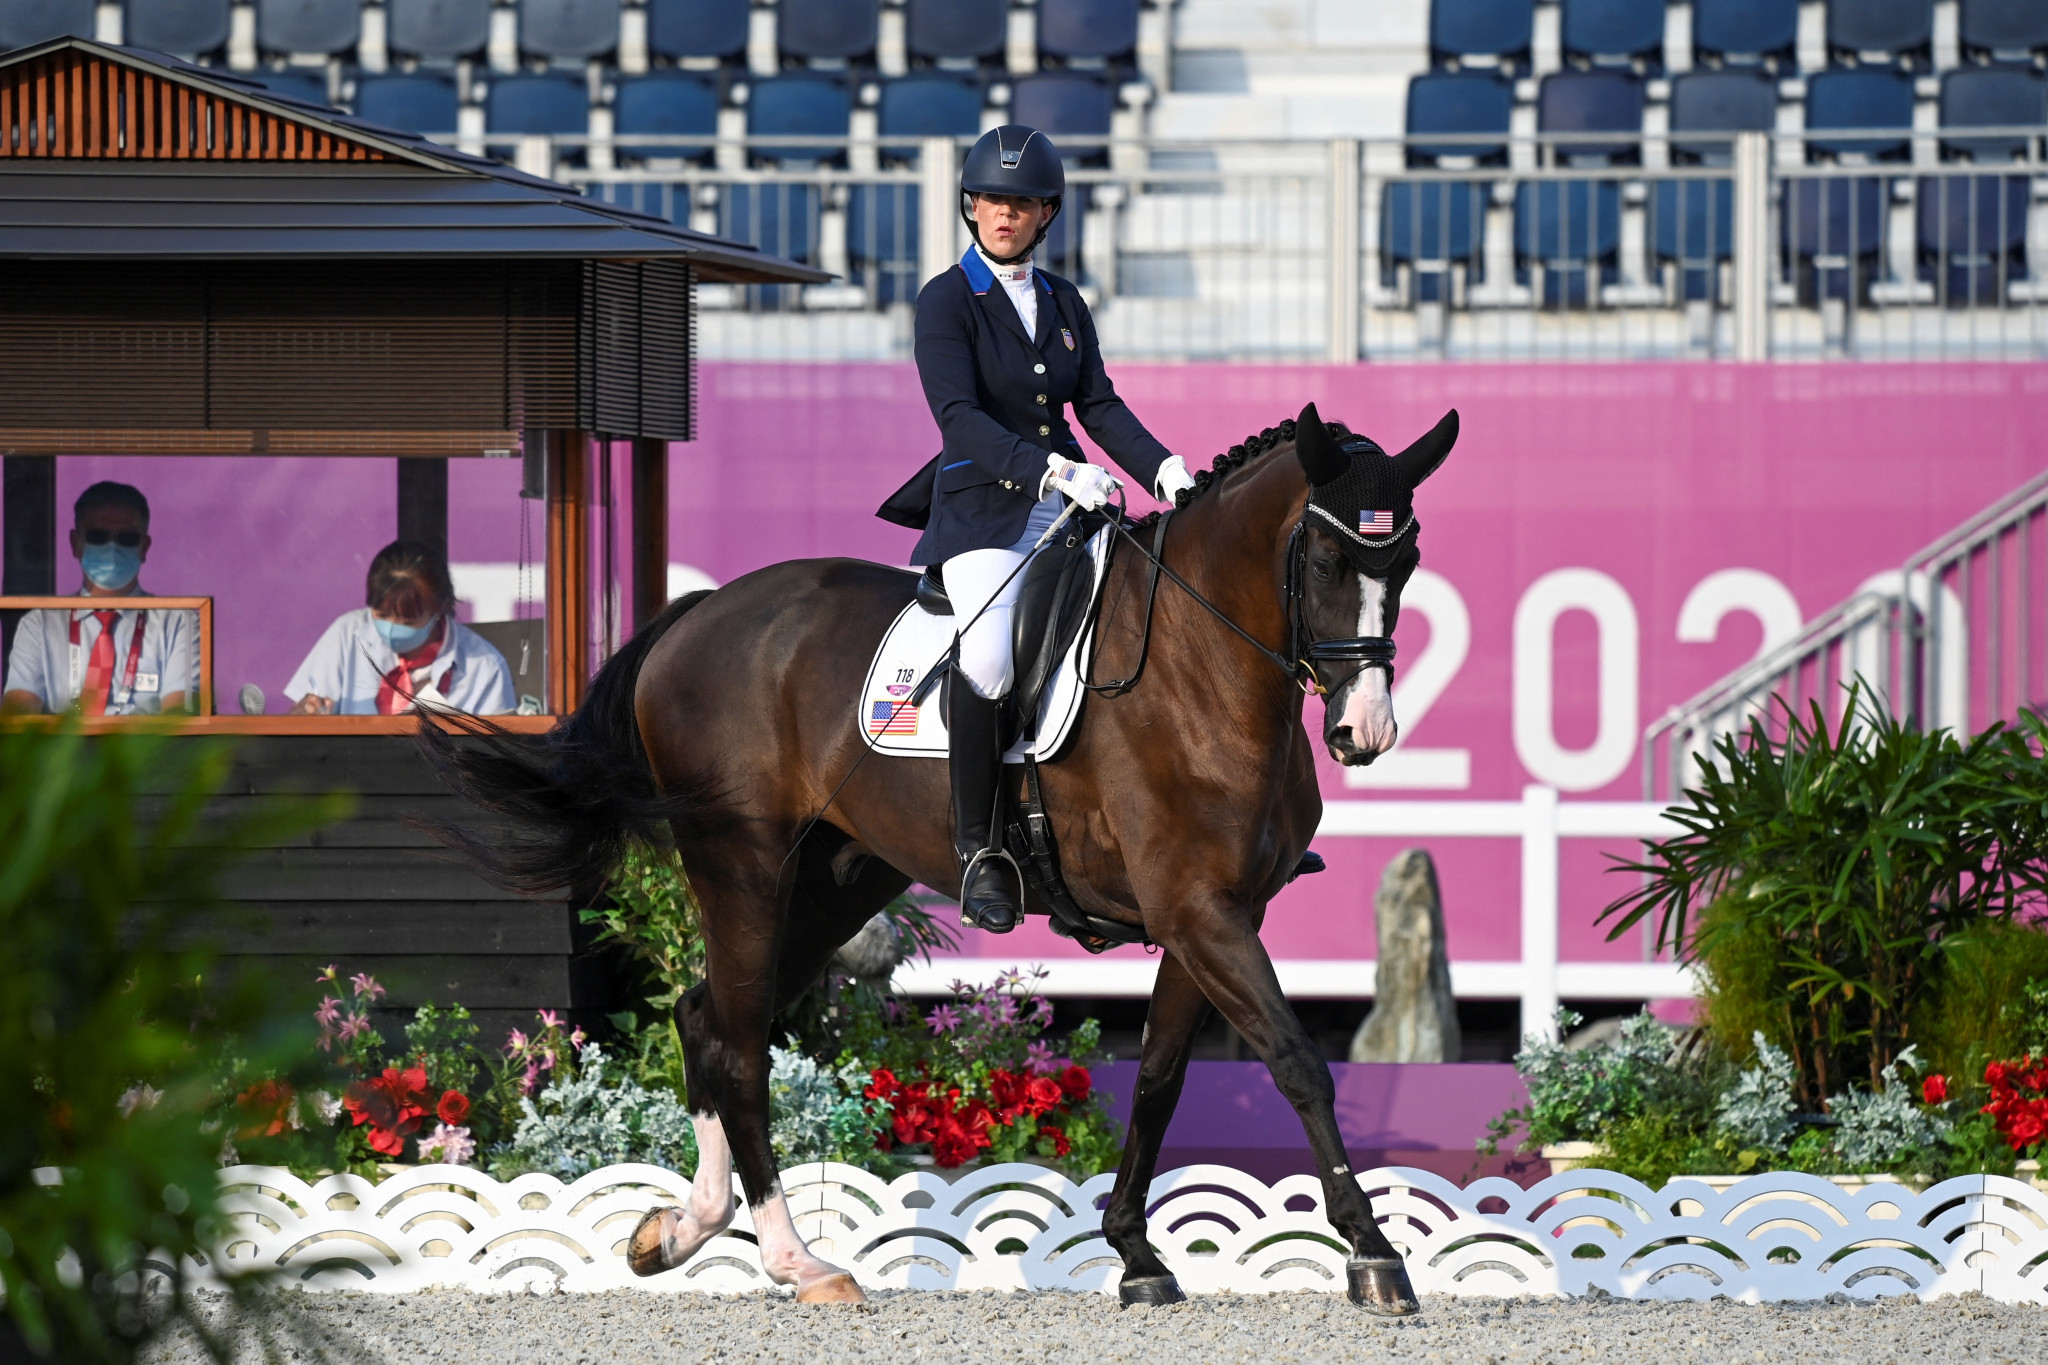 American Roxanne Trunnell earned gold in the individual grade I dressage competition ©Getty Images